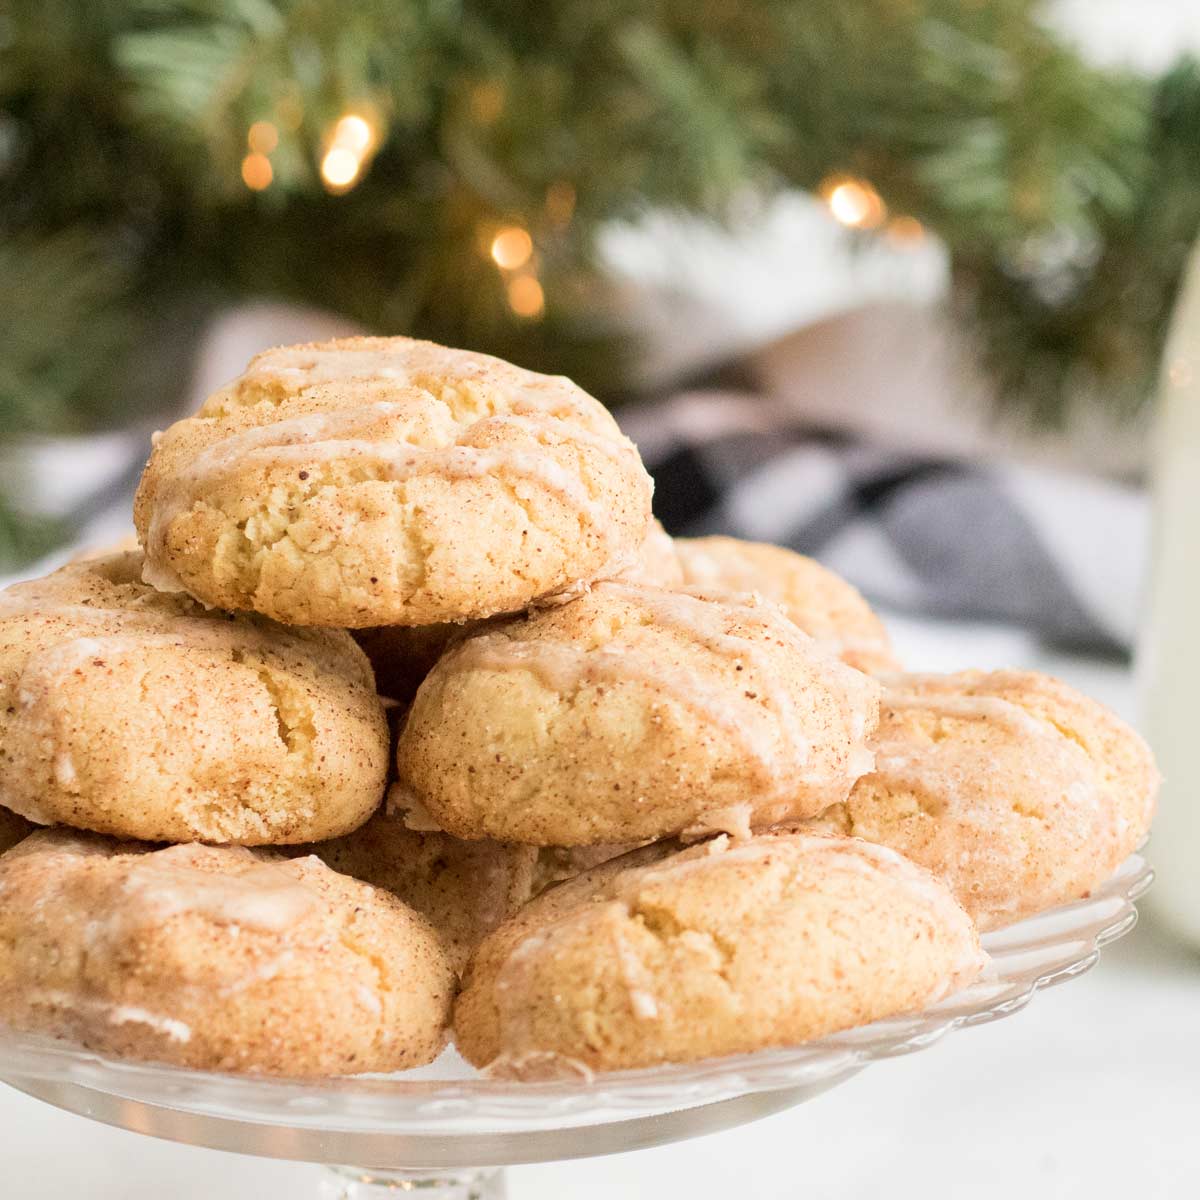 Classic soft and chewy snickerdoodle cookies made with a fun holiday twist... eggnog!  Filled with warm spices, actual eggnog, and drizzled with a sweet eggnog glaze! #cookies #dessert #baking #holiday #christmas #eggnog #snickerdoodle #cookieswap